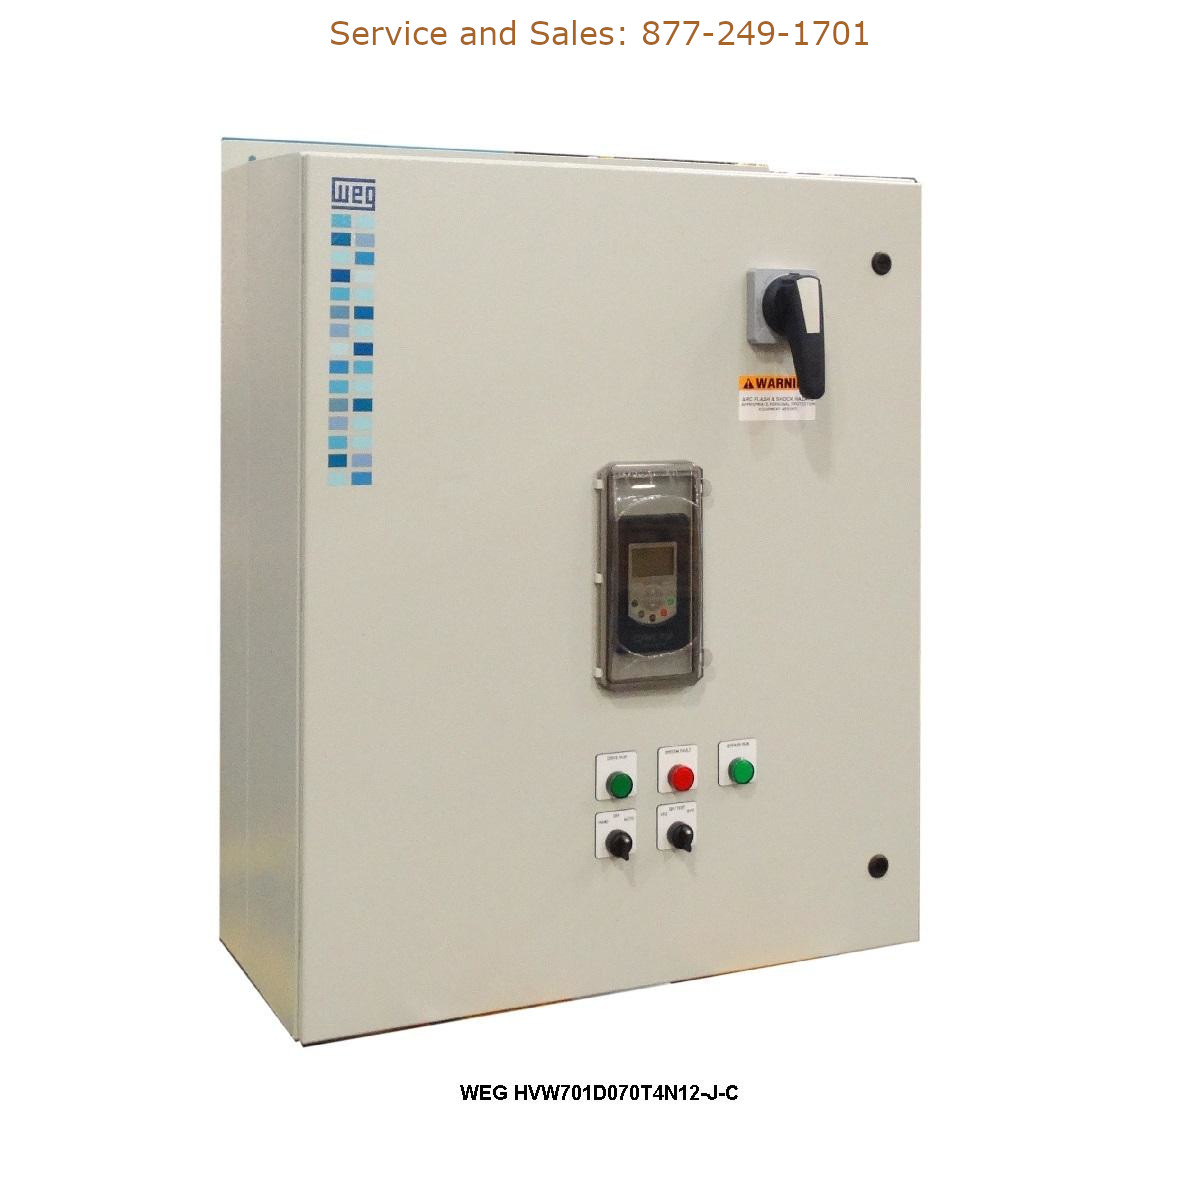 WEG HVW701D070T4N12-J-C WEG Model Number HVW701D070T4N12-J-C WEG Drives, Variable Speed Drives Repair Service, Troubleshooting, Replacement Parts https://gesrepair.com/wp-content/uploads/2022/WEG/WEG_HVW701D070T4N12-J-C_Drives_Variable_Speed_Drives.jpg